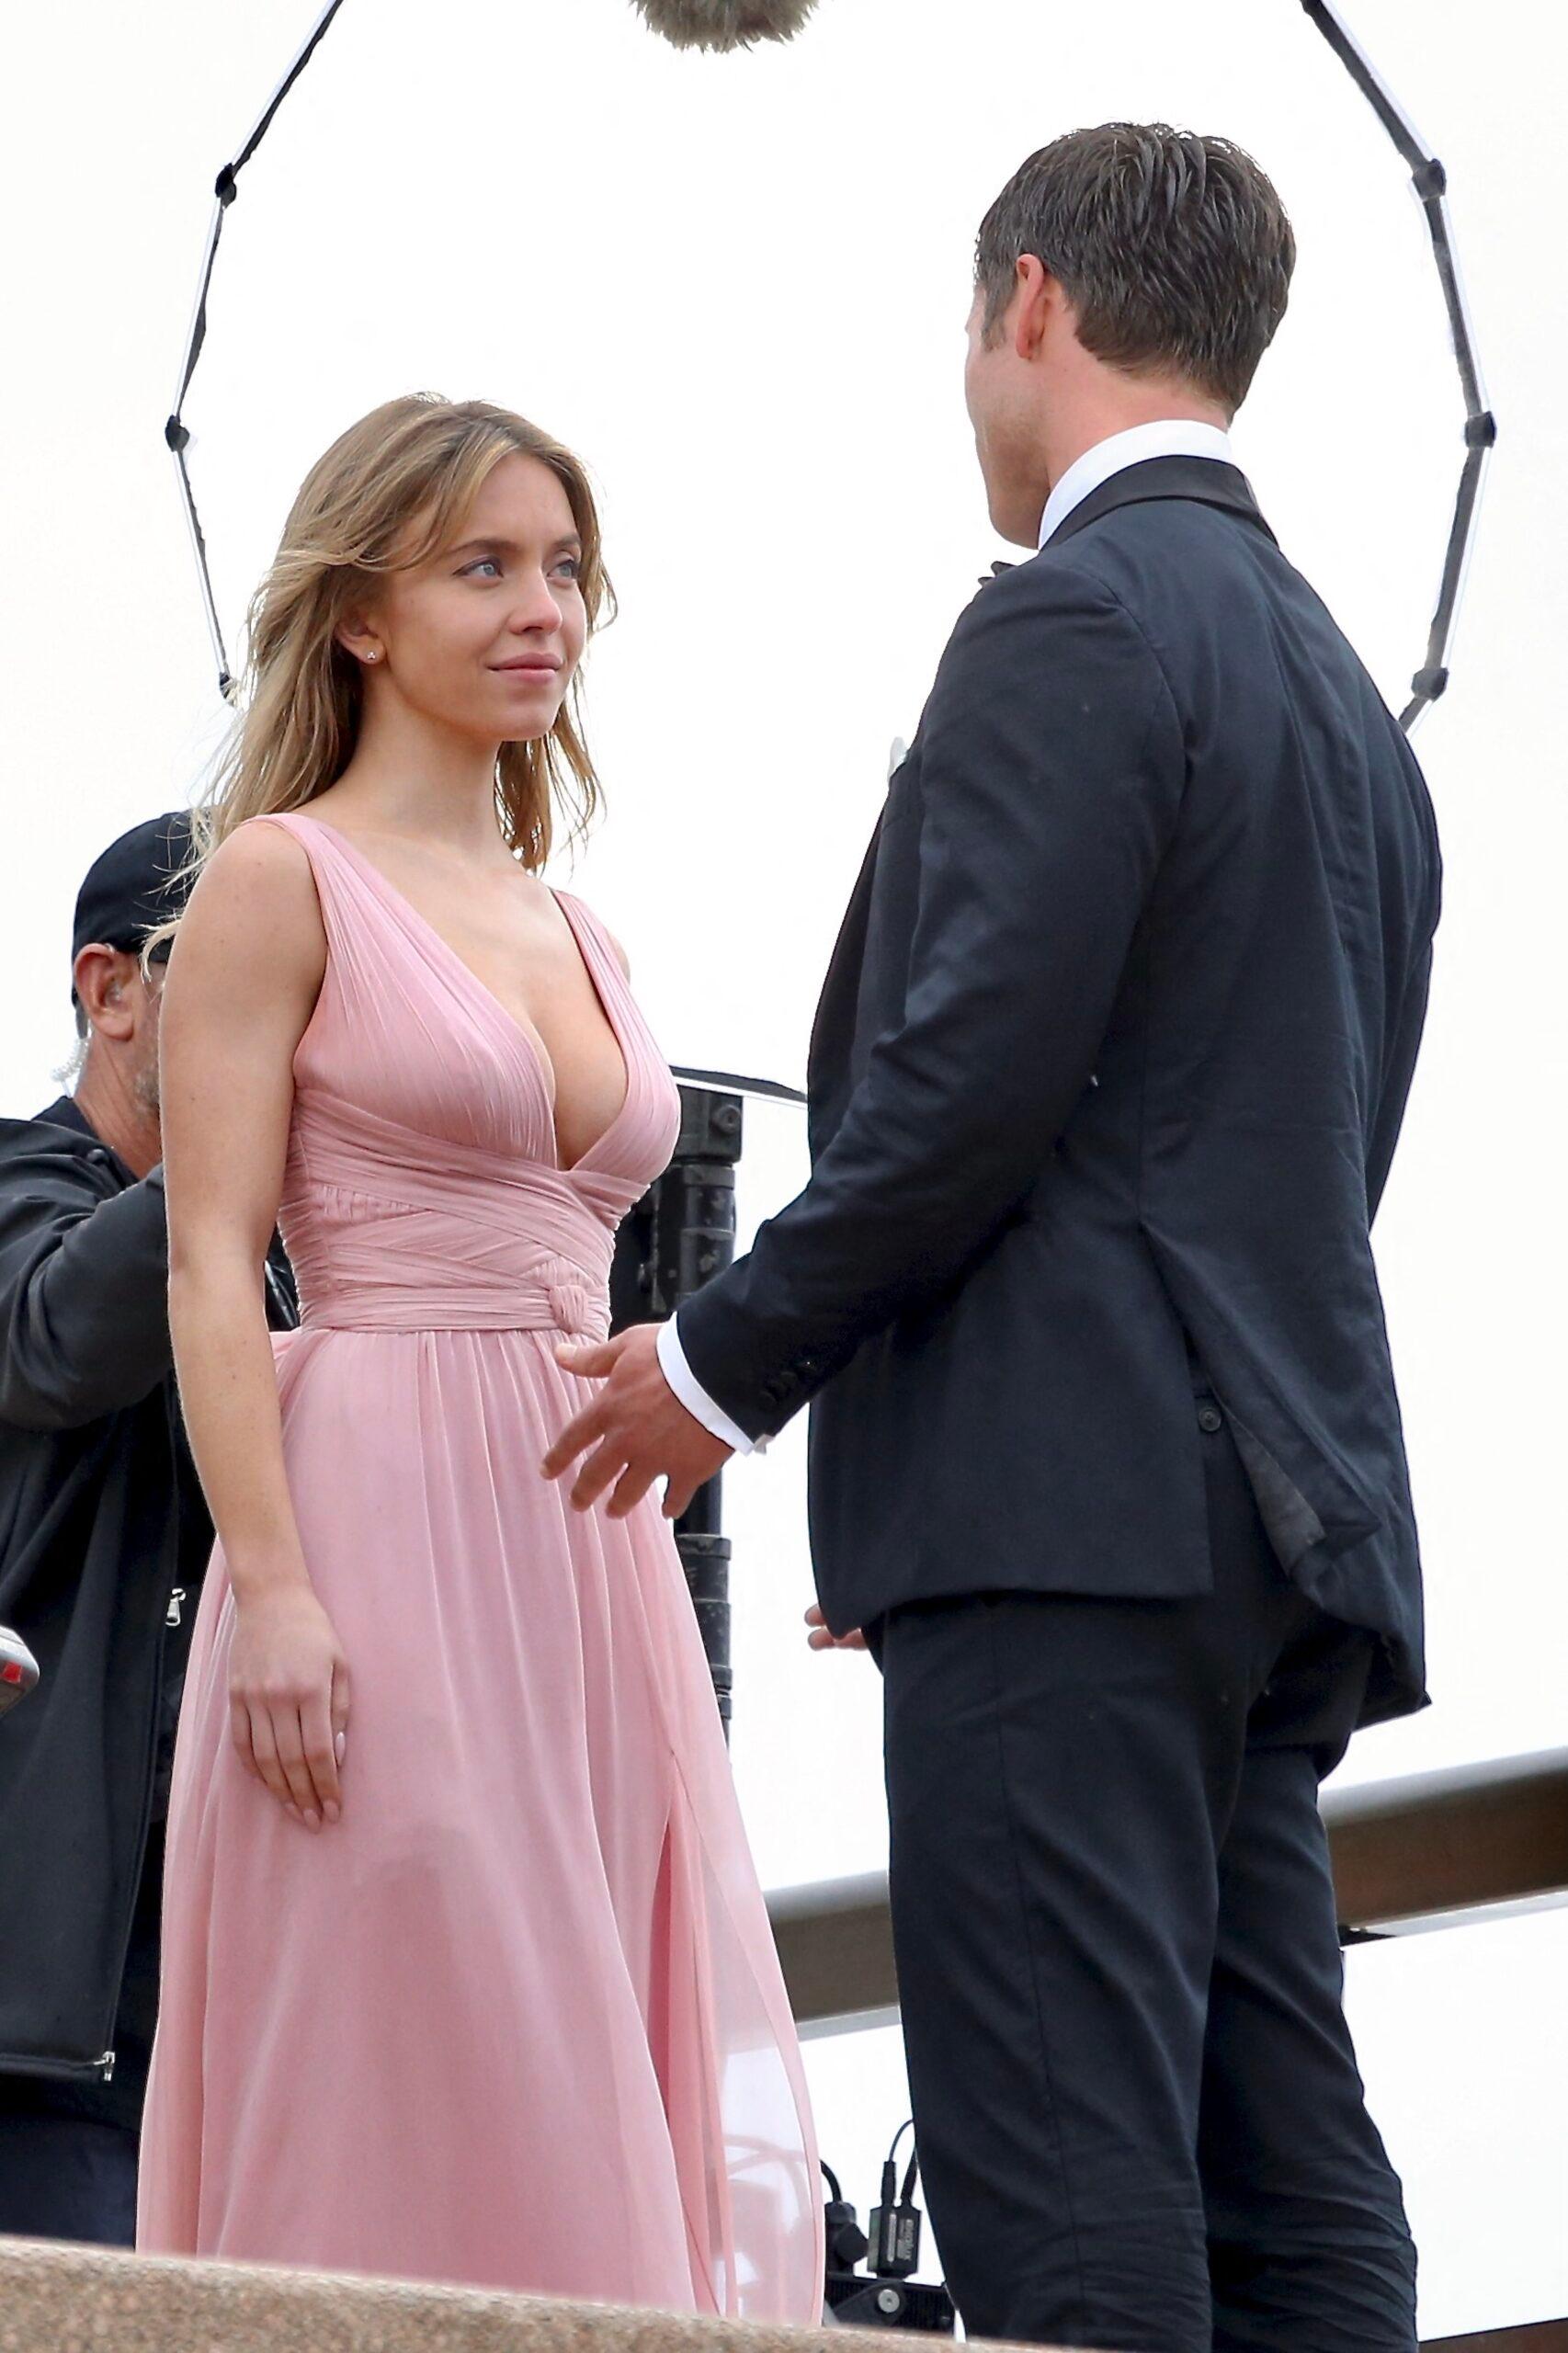 Sydney Sweeney and Glen Powell film what appears to be a wedding scene for their new rom-com